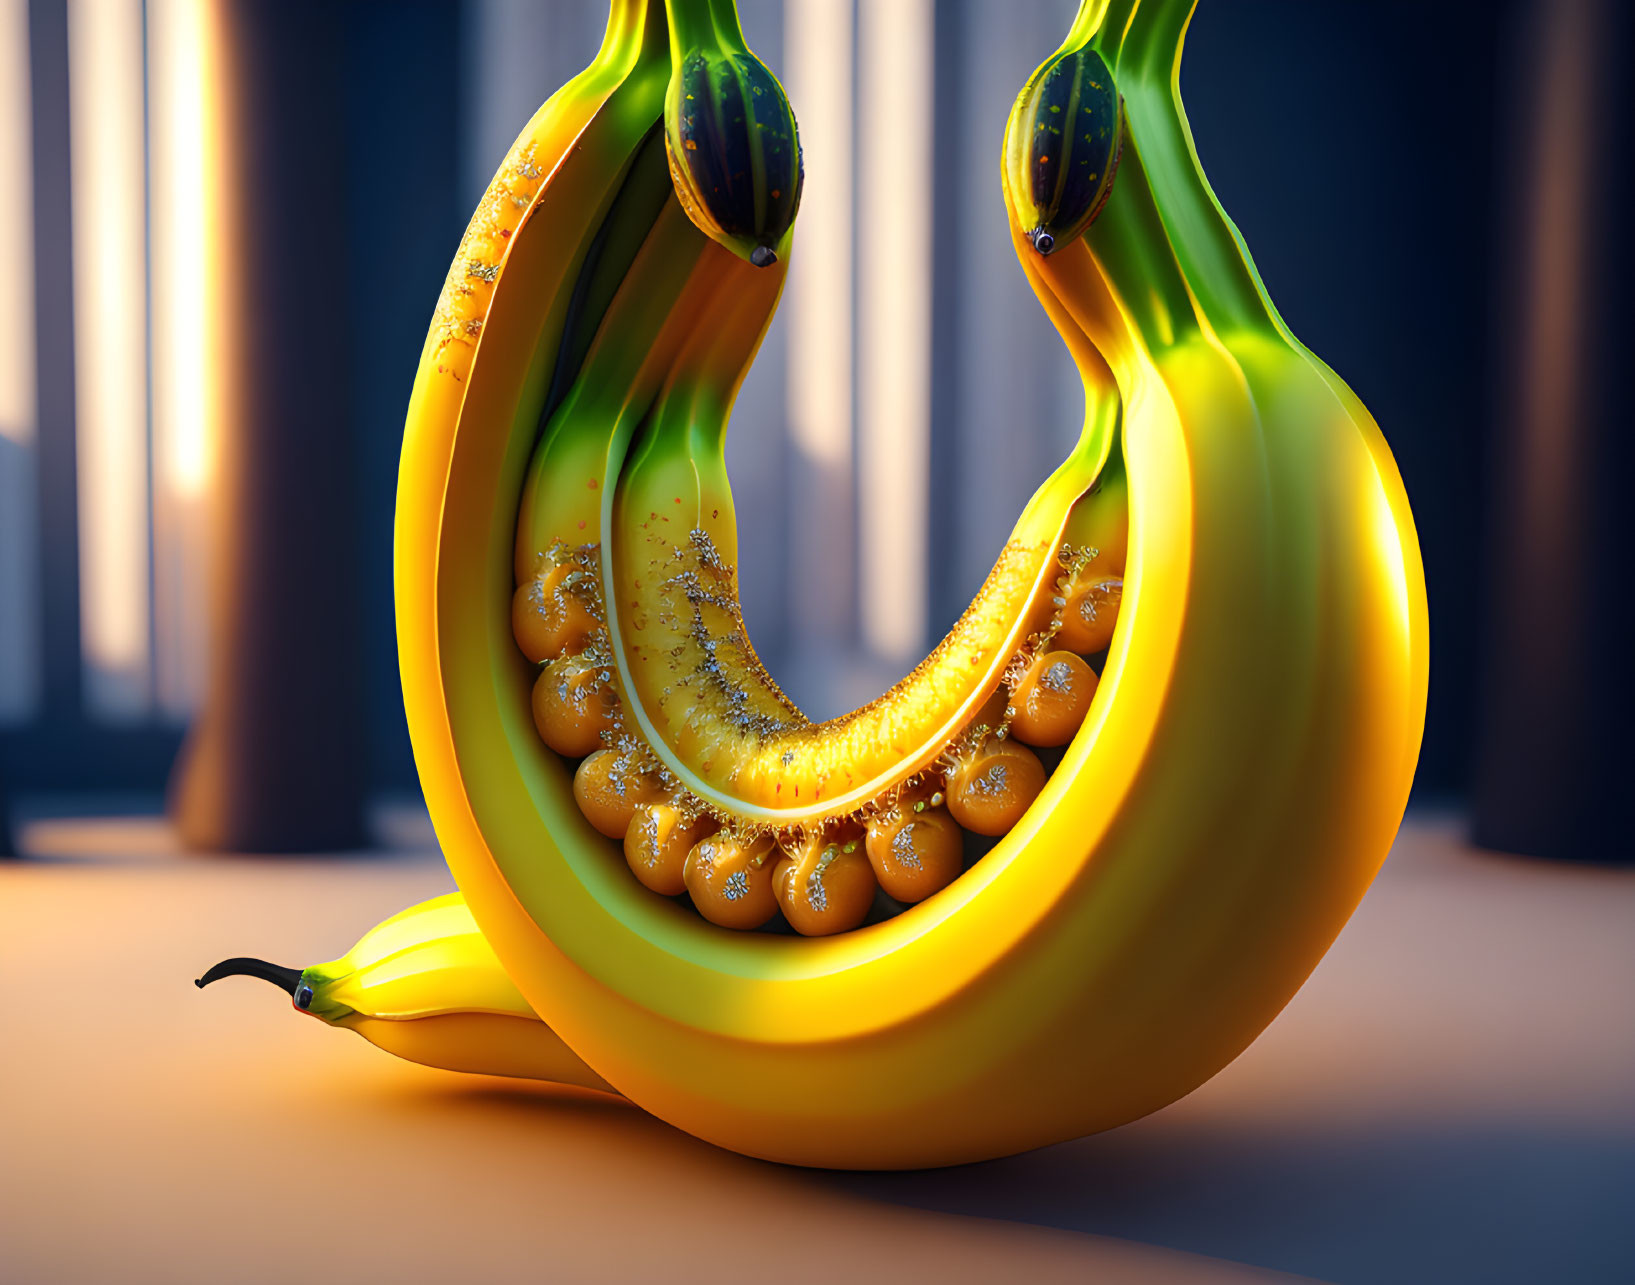 Surreal image: Bananas transforming into liquid in a room with vertical lighting